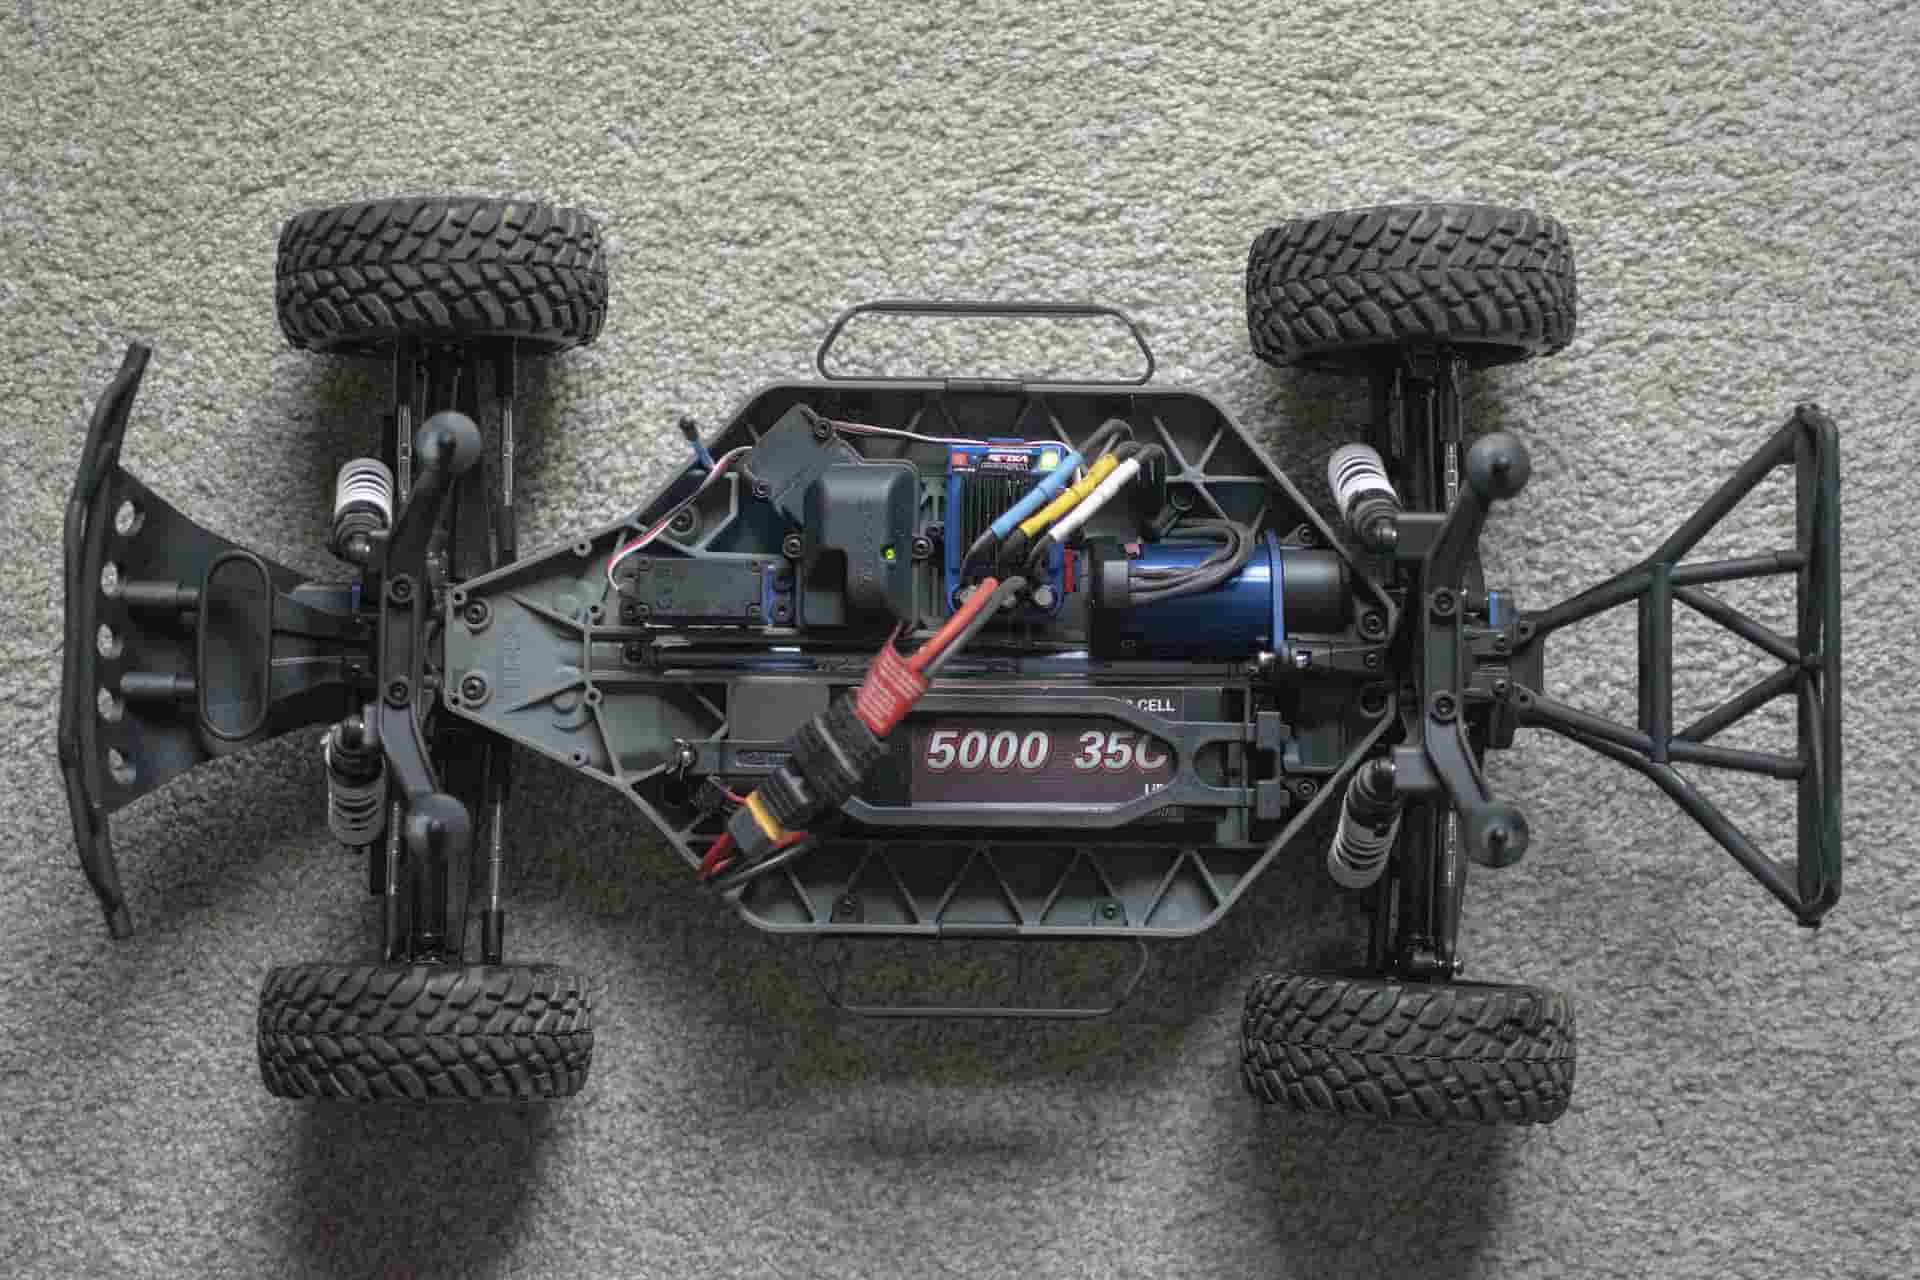 Rc Buggy: Essential Components of an RC Buggy